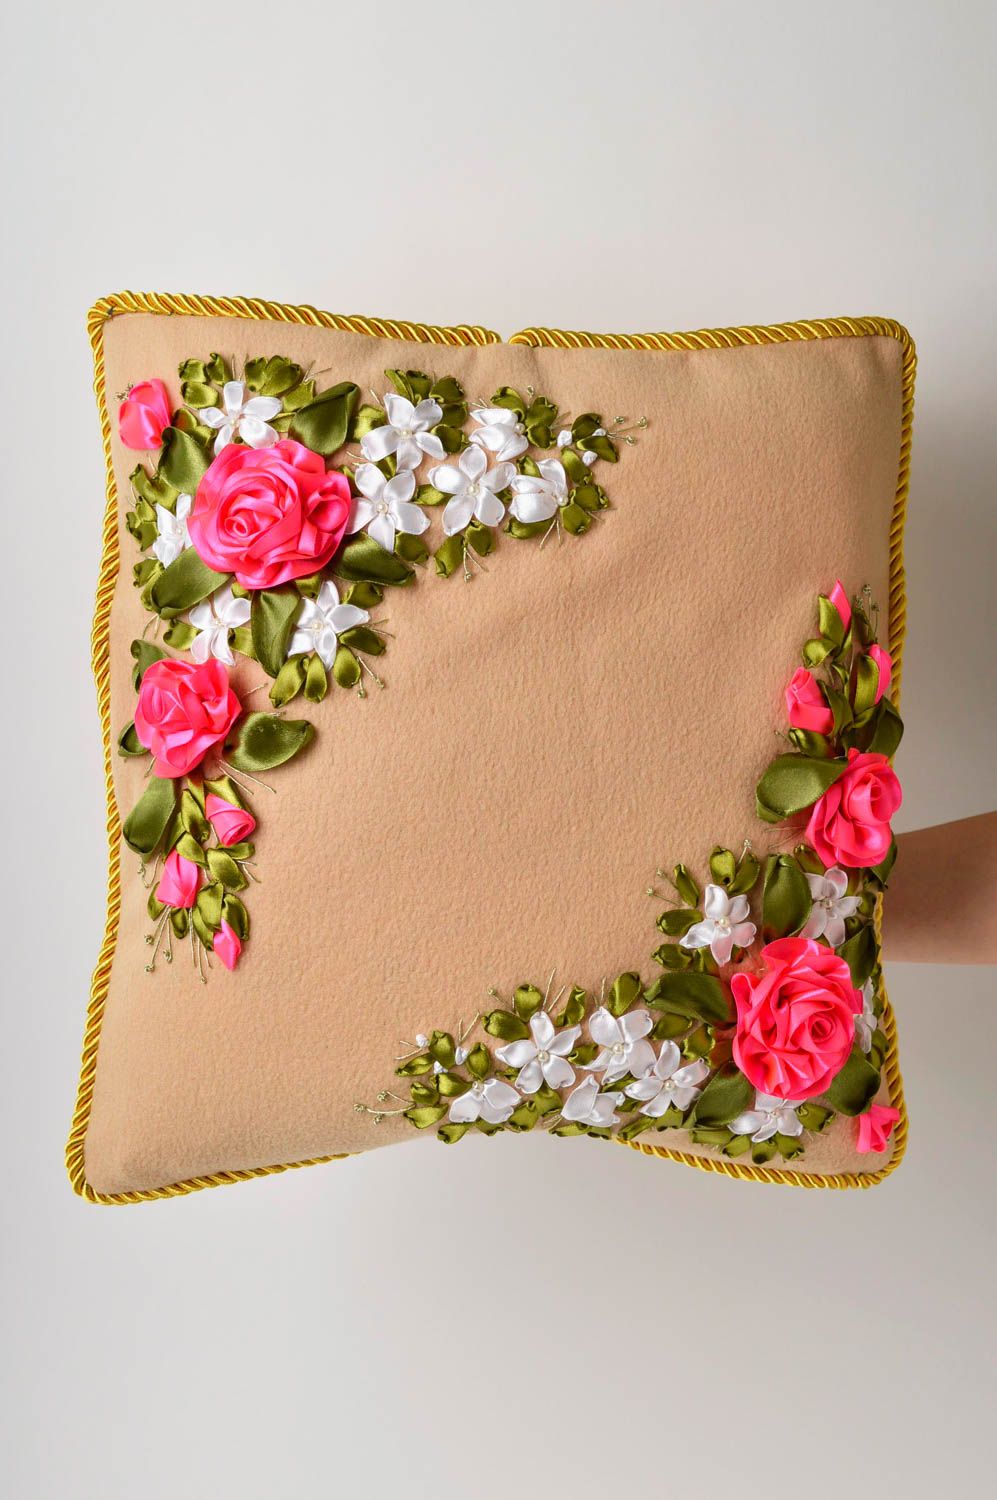 Handmade pillowcase decorative flower pillowcase cool rooms decorative use only photo 5